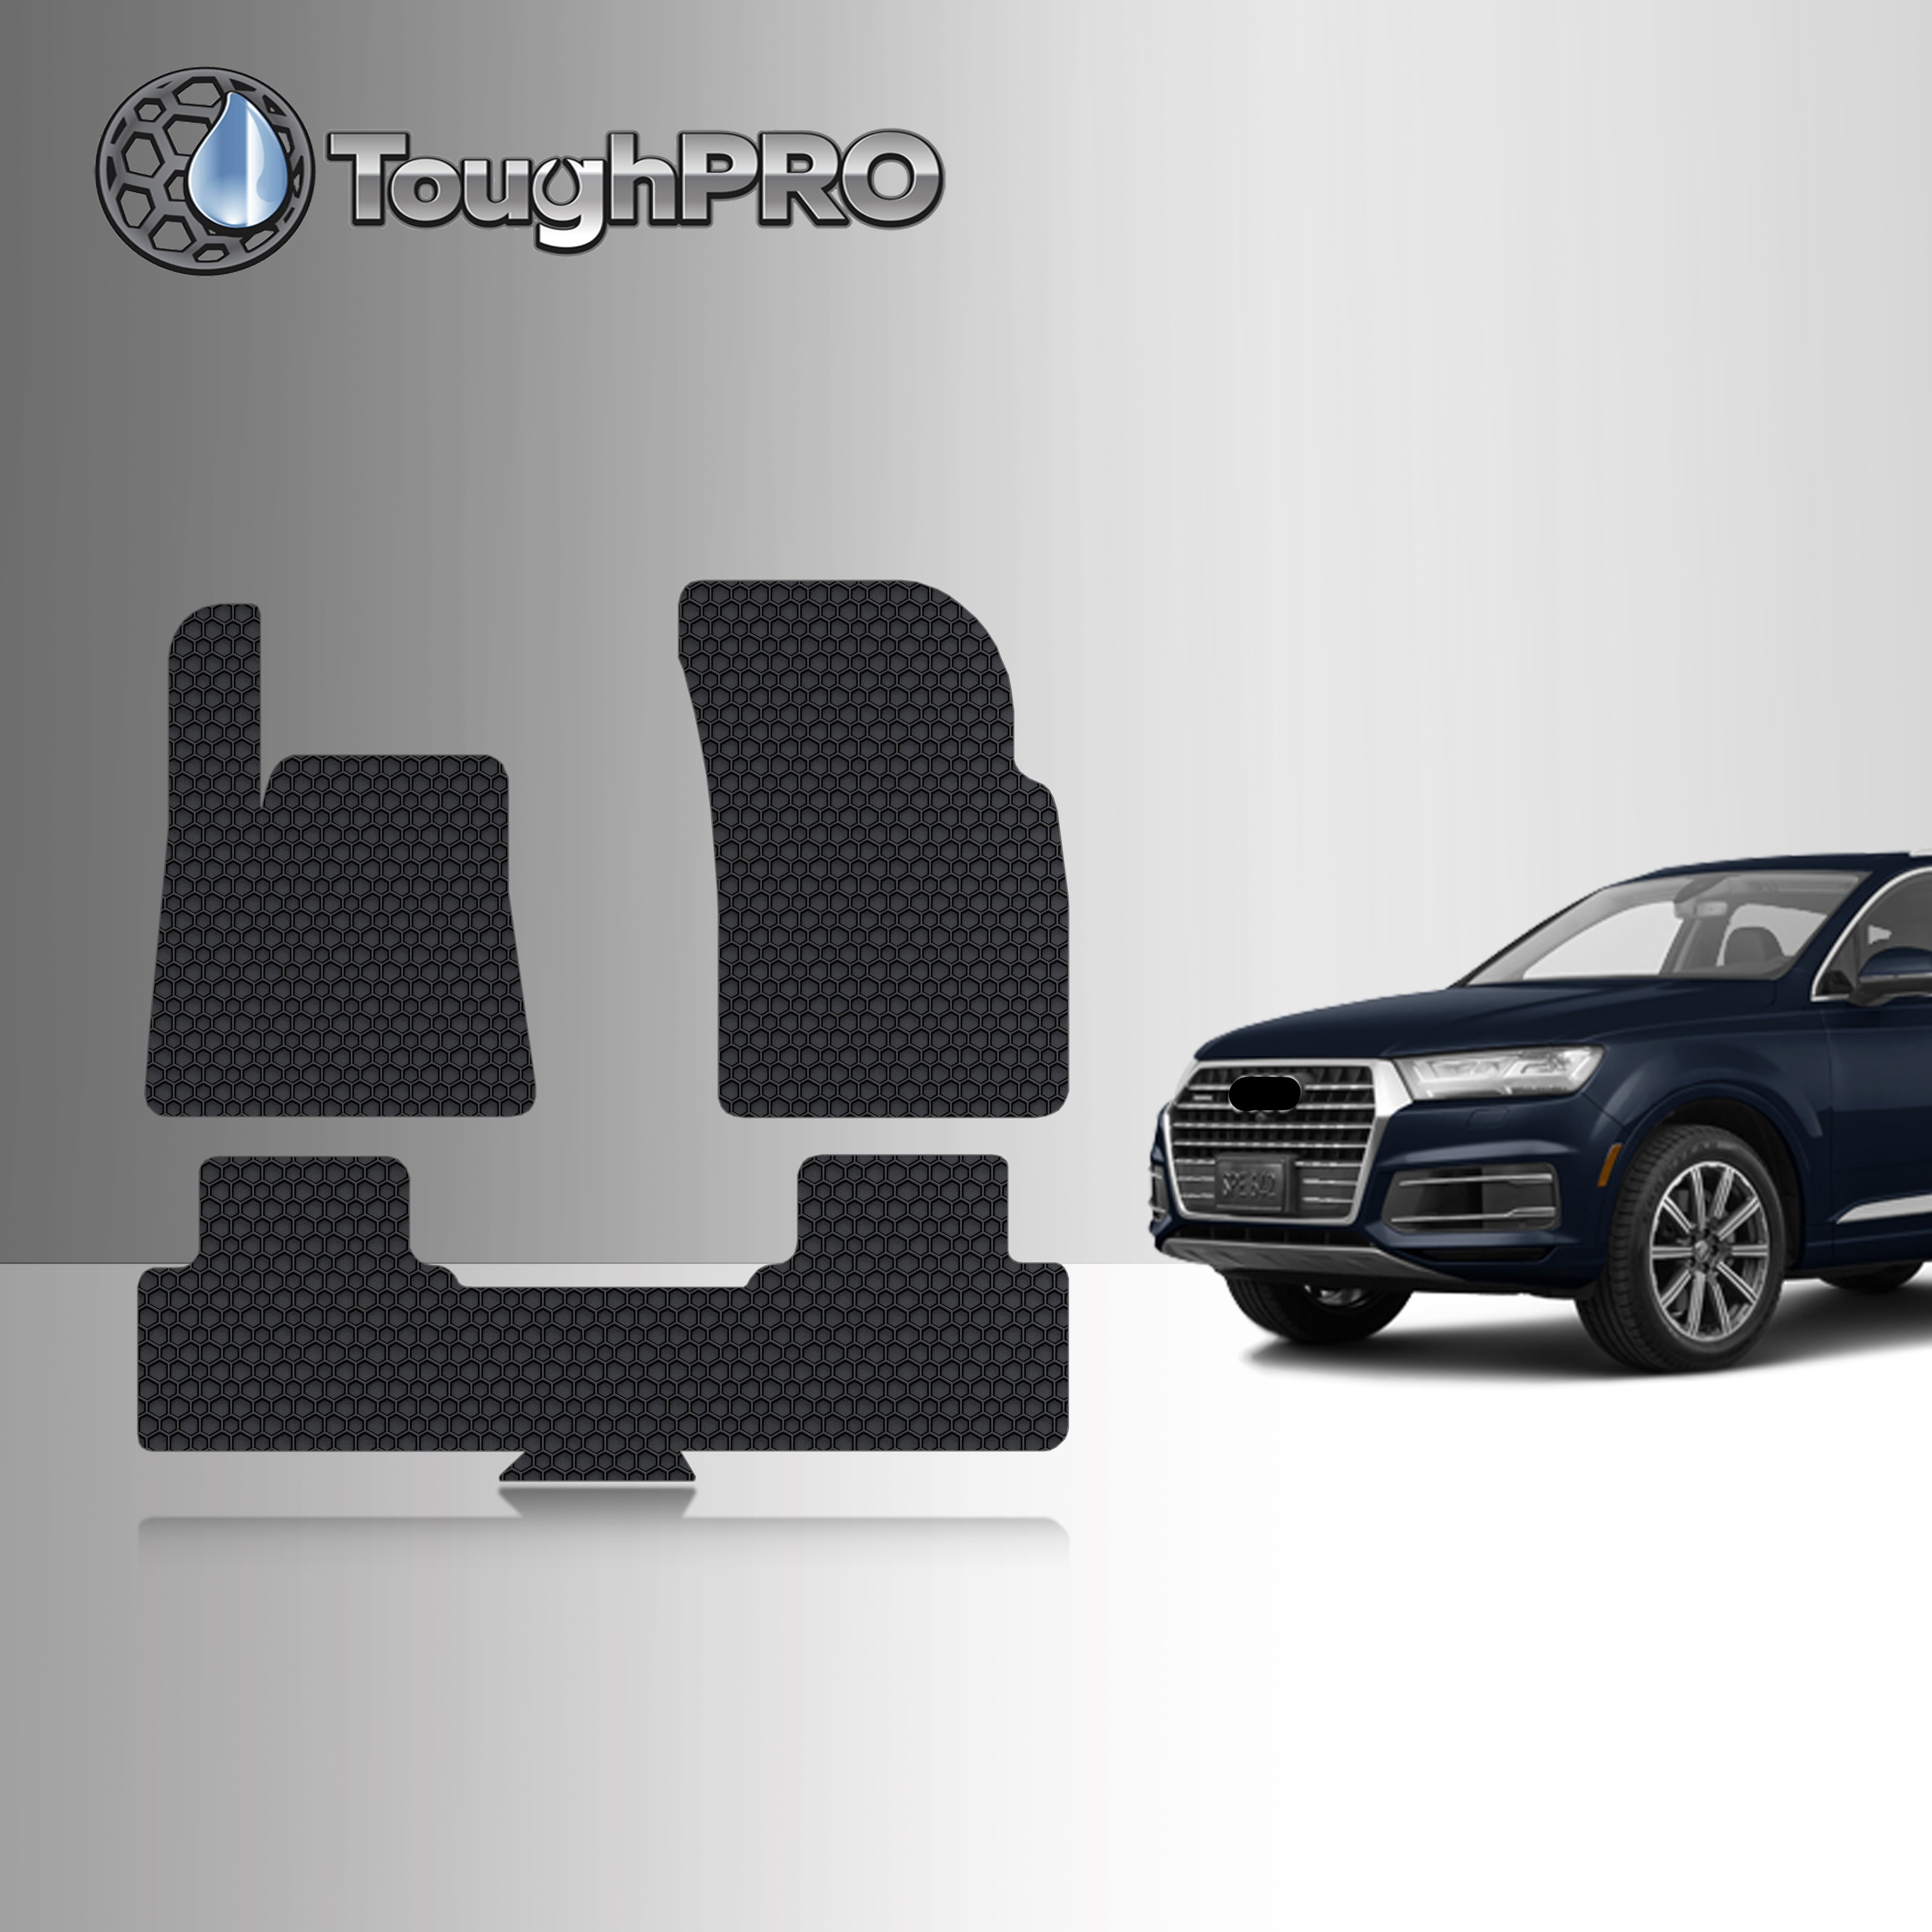 2018 All Weather Heavy Duty - Made in USA ToughPRO Cargo/Trunk Mat Compatible with Audi Q7 2019 - Black Rubber 2017 